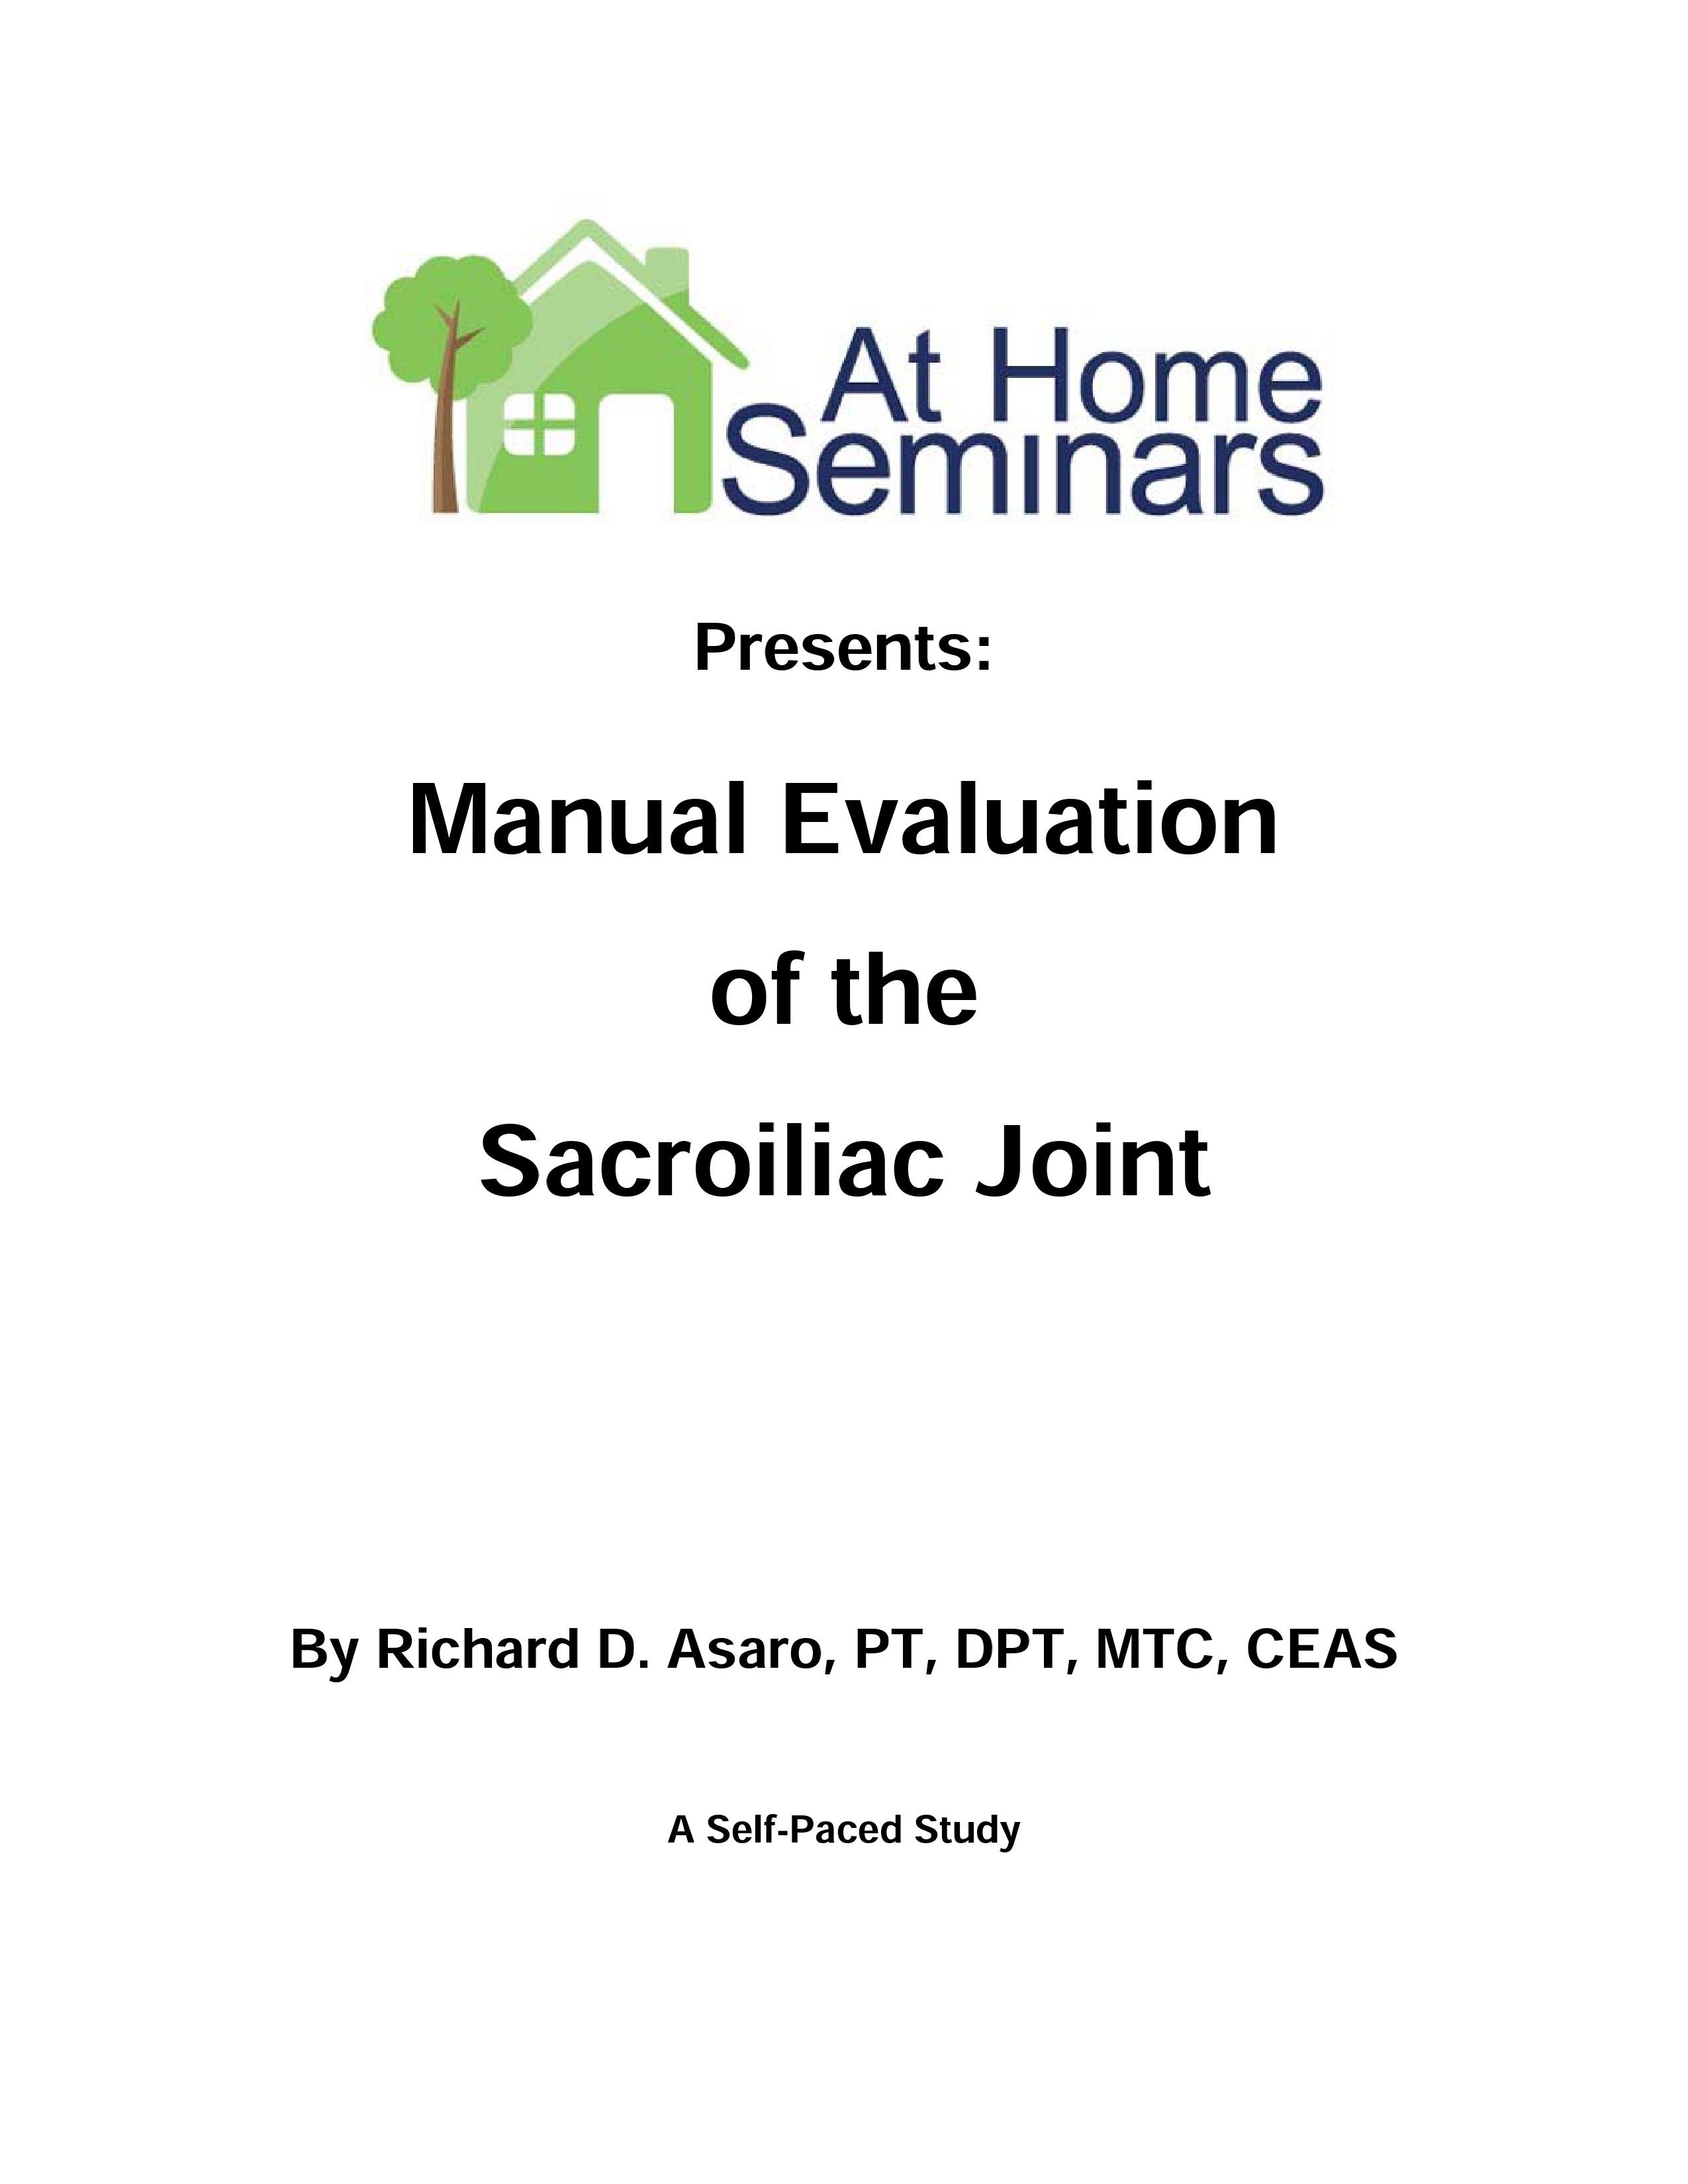 Manual Evaluation of the Sacroiliac Joint 